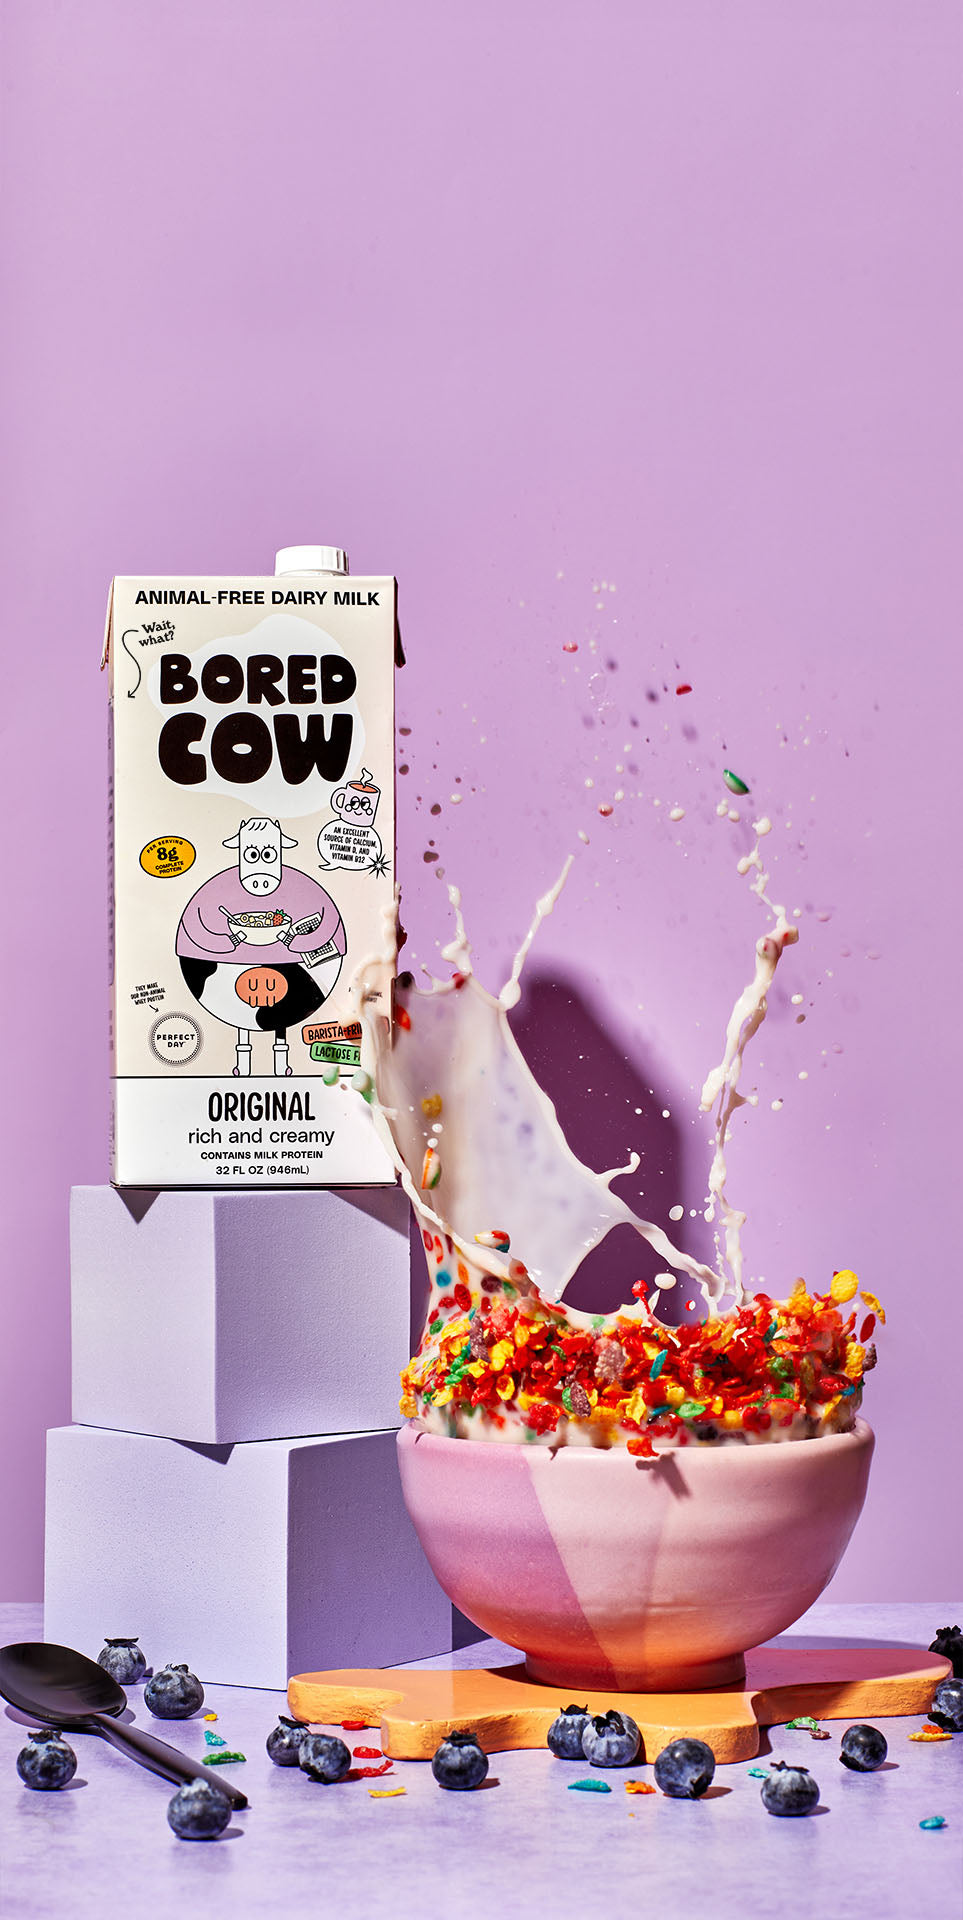 carton of 32 oz Original flavor Bored Cow animal-free dairy milk, to the right is a bowl of cereal with milk splashing out of it